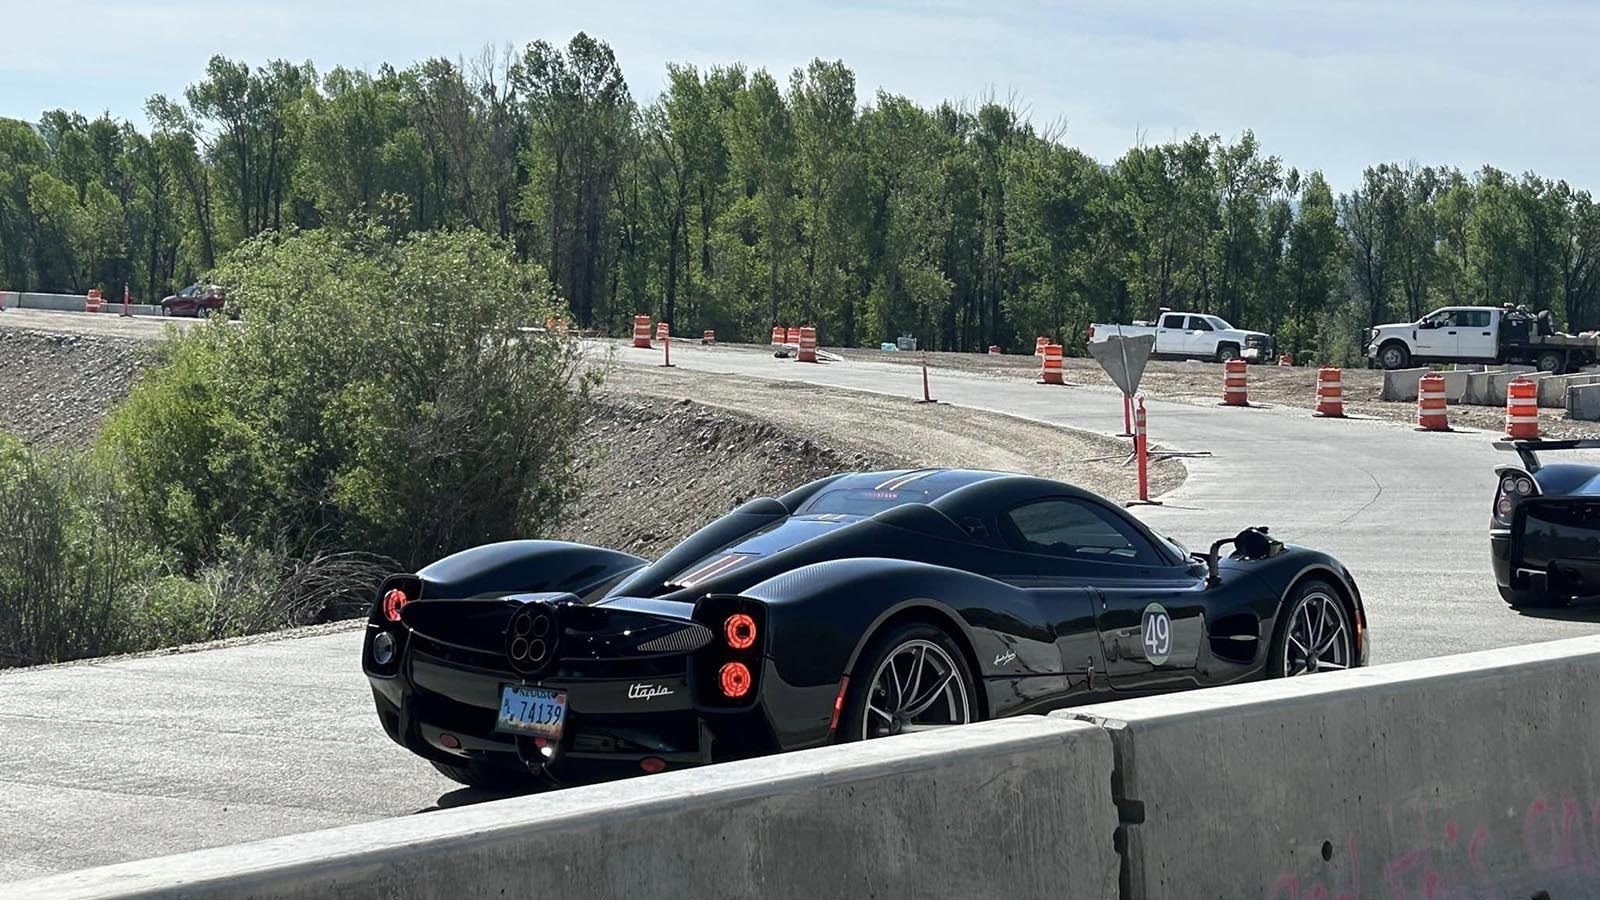 One in a lineup of $4 million Pagani supercars navigating construction in Jackson, Wyoming.